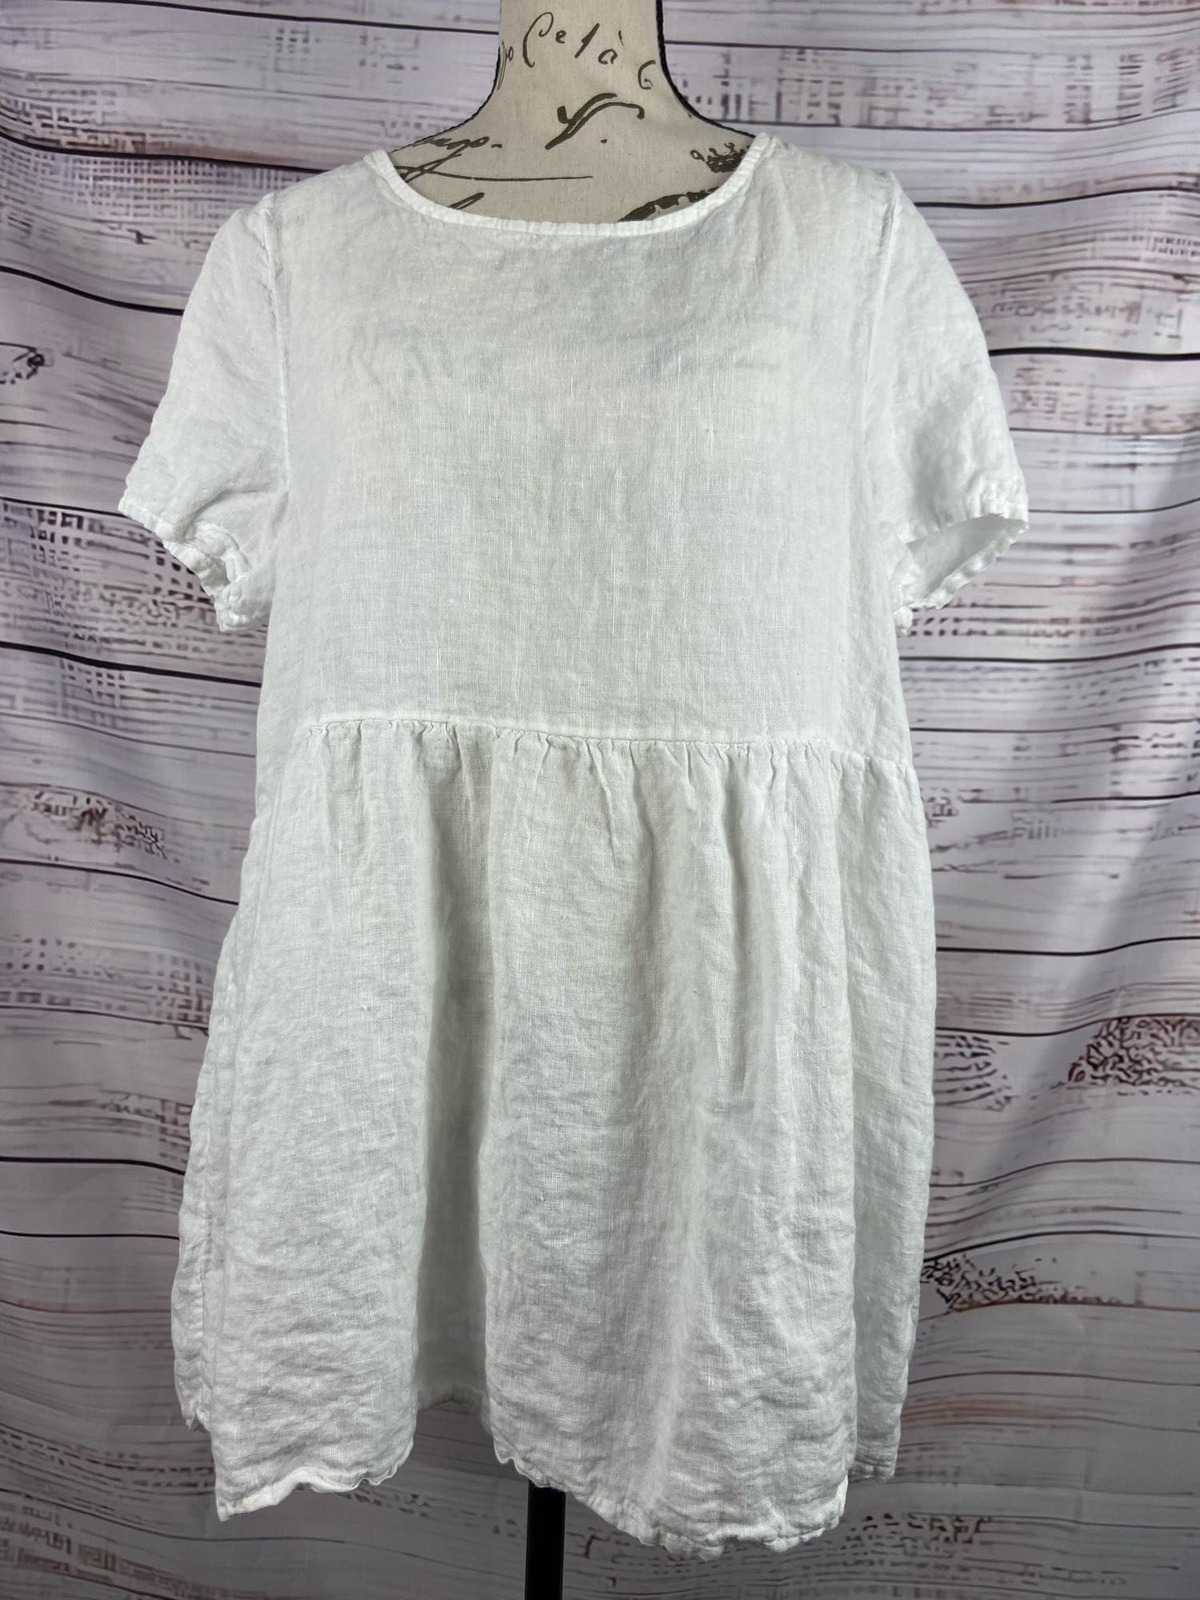 Primary image for Francesca Bettini Italy Linen Tunic Top Womens L Short Sleeve White Babydoll